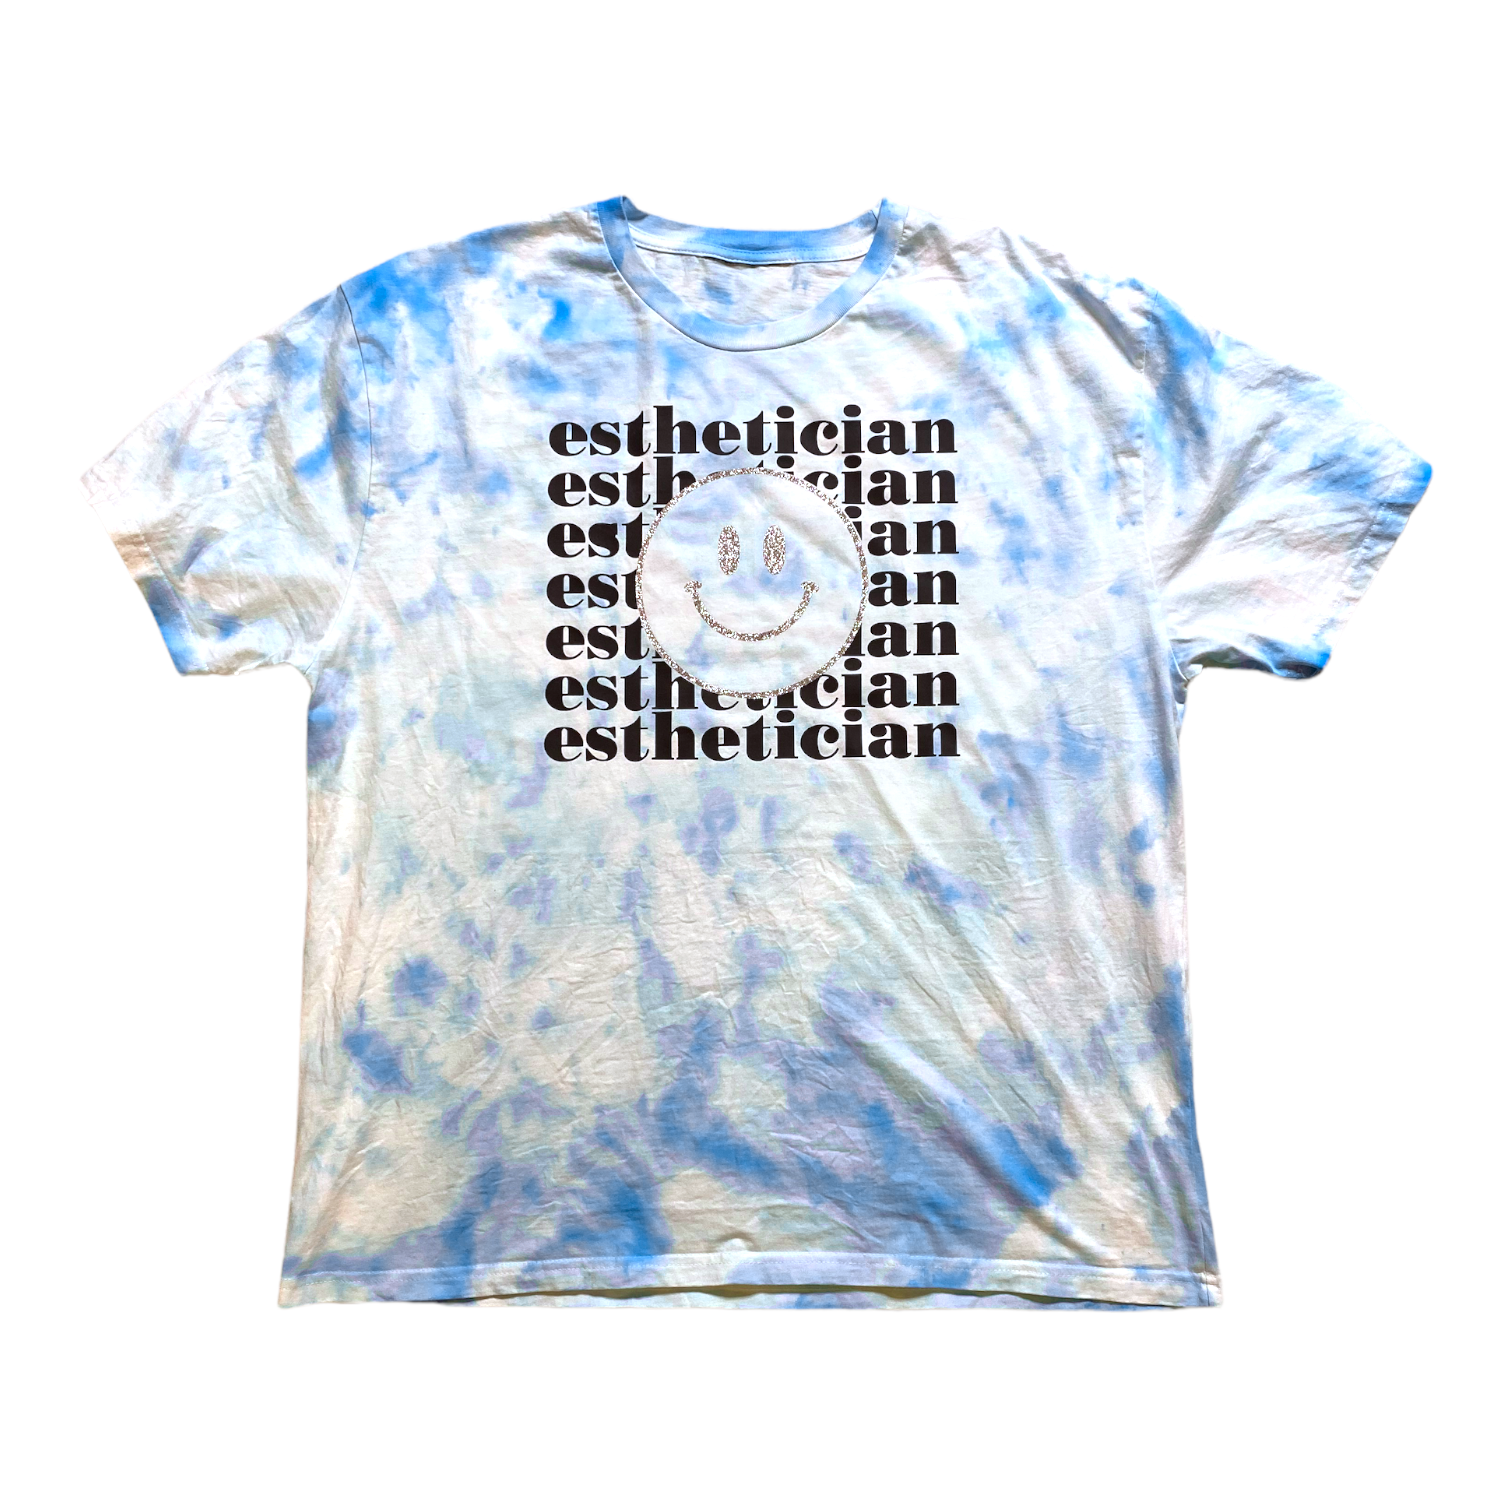 T-SHIRT - ESTHETICIAN ( tie dye, relaxed fit, vinyl print with glitter )